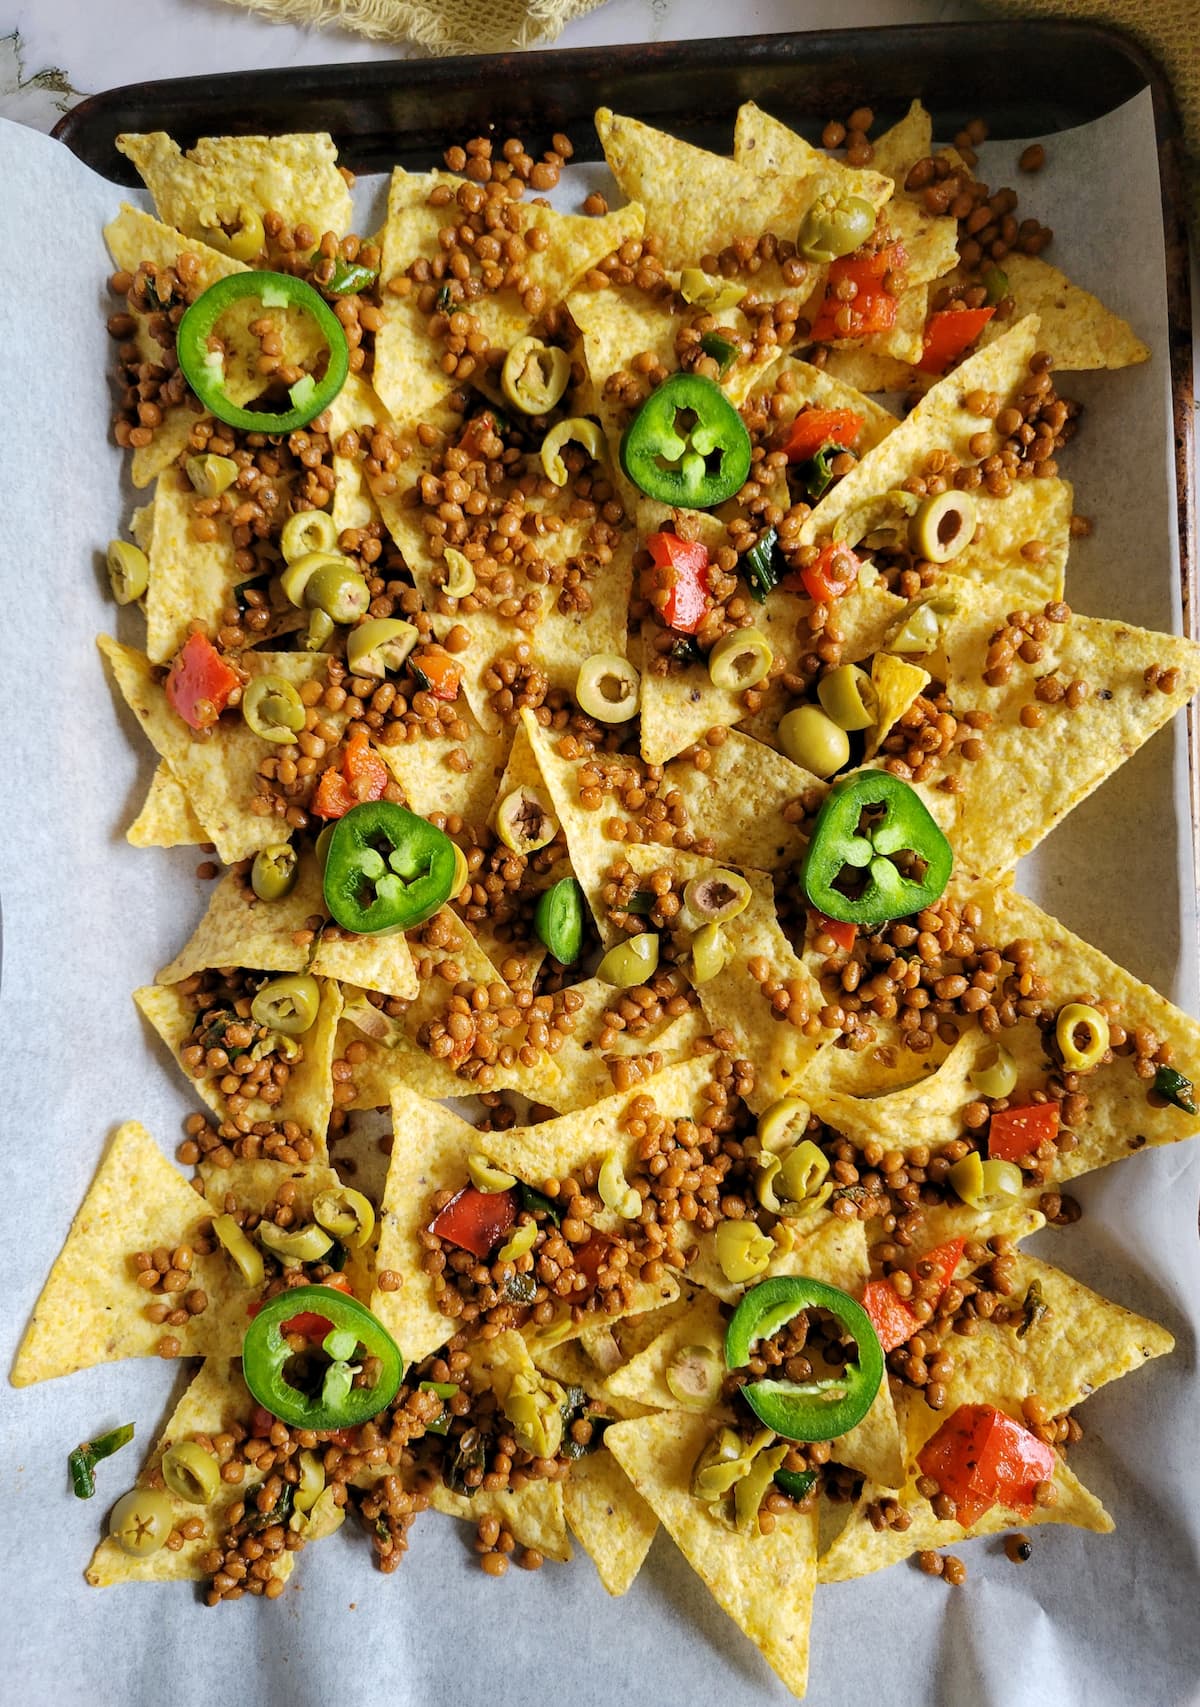 lentils, jalapenos, red peppers and green olives piled on top of tortilla chips on a parchment lined baking sheet